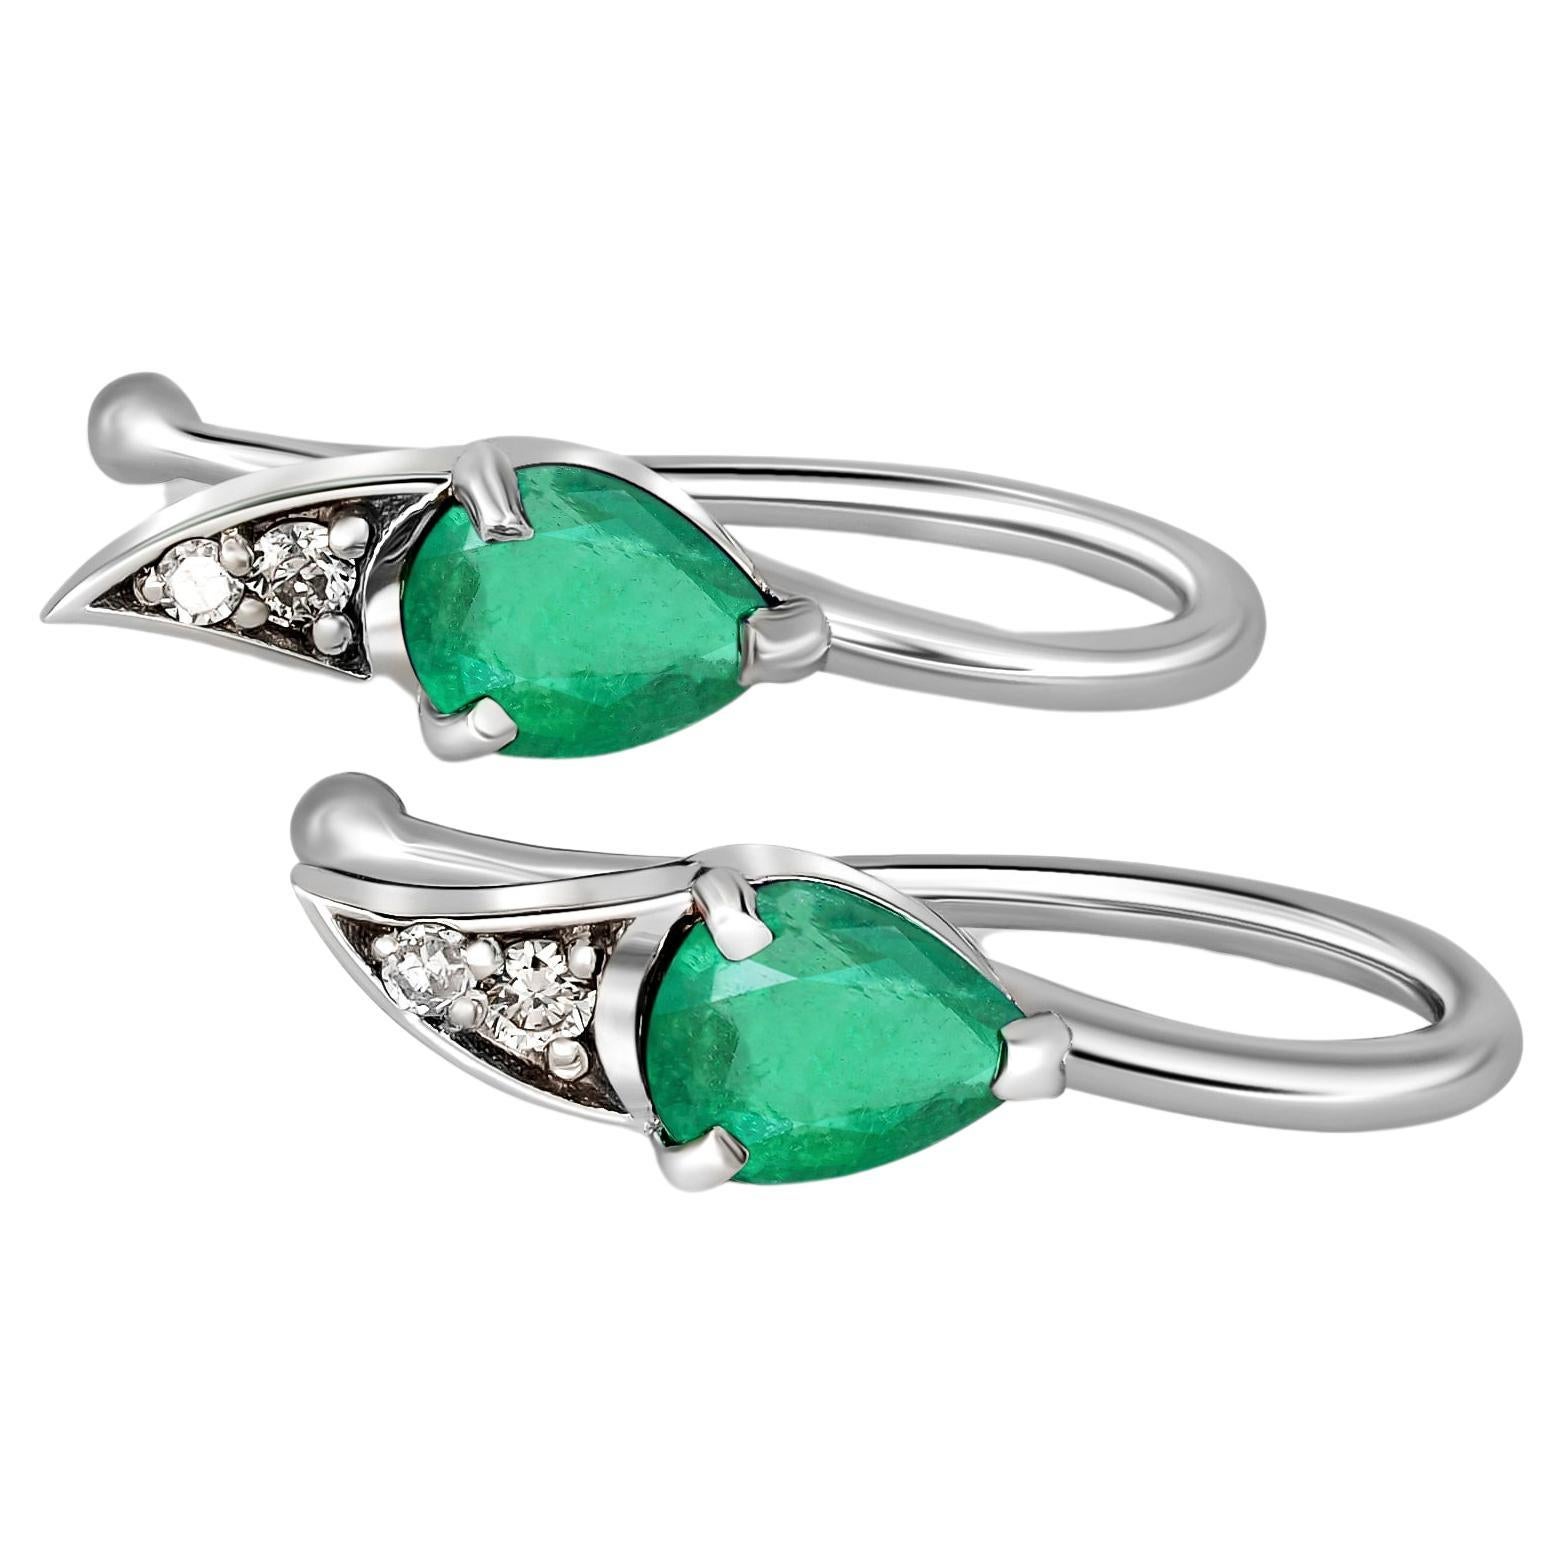 14k gold earrings with natural emerald and diamonds.